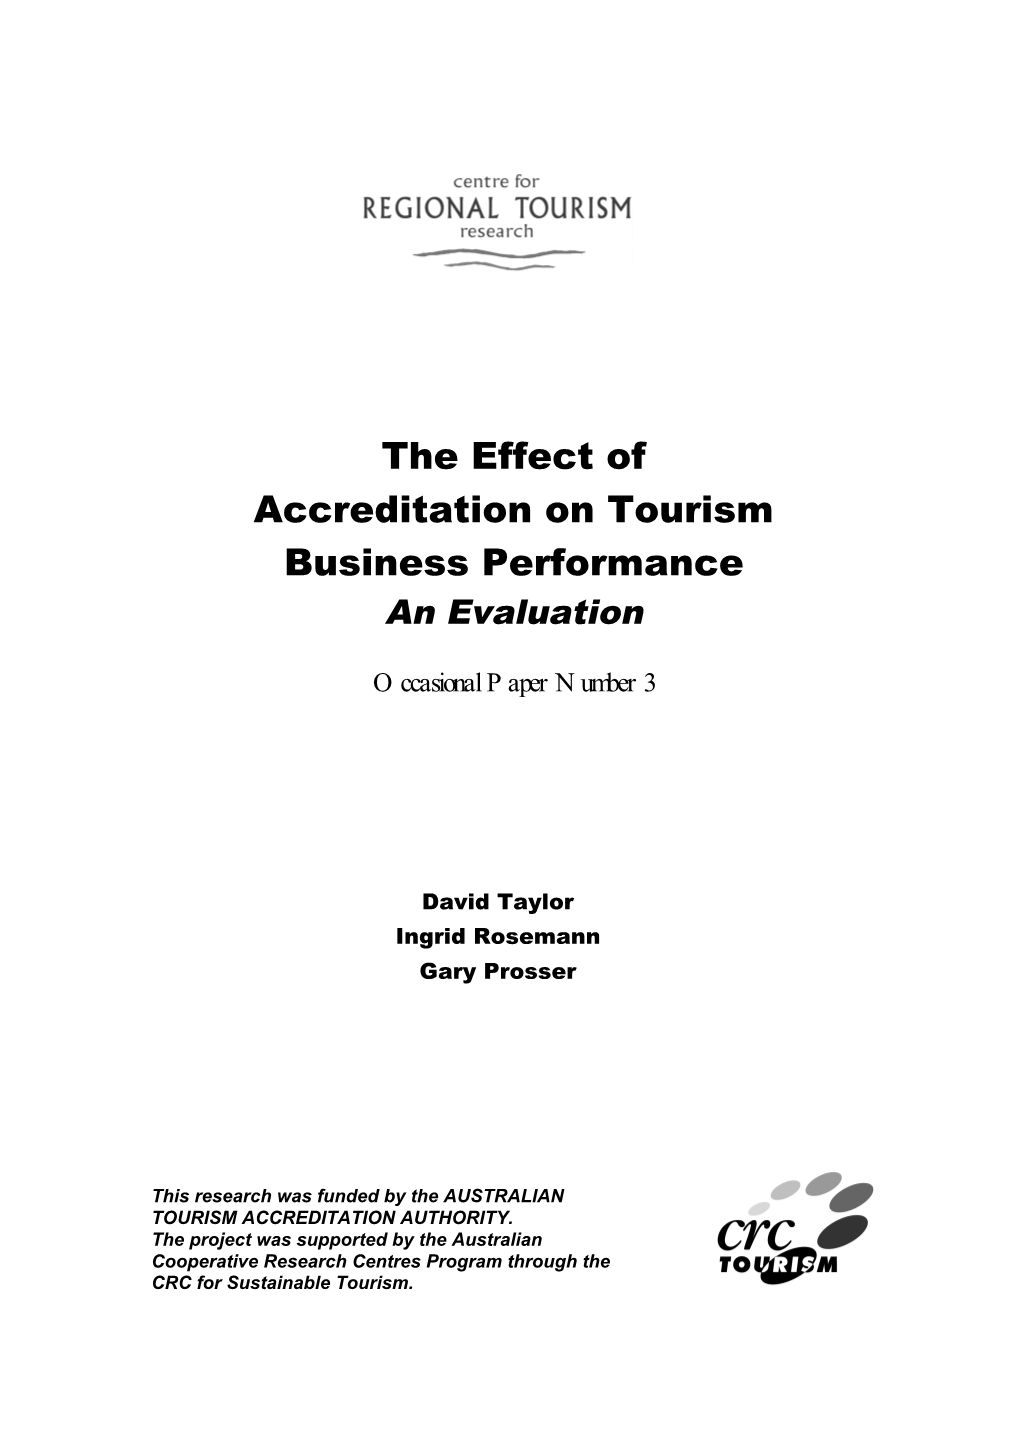 The Effect of Accreditation on Tourism Business Performance an Evaluation